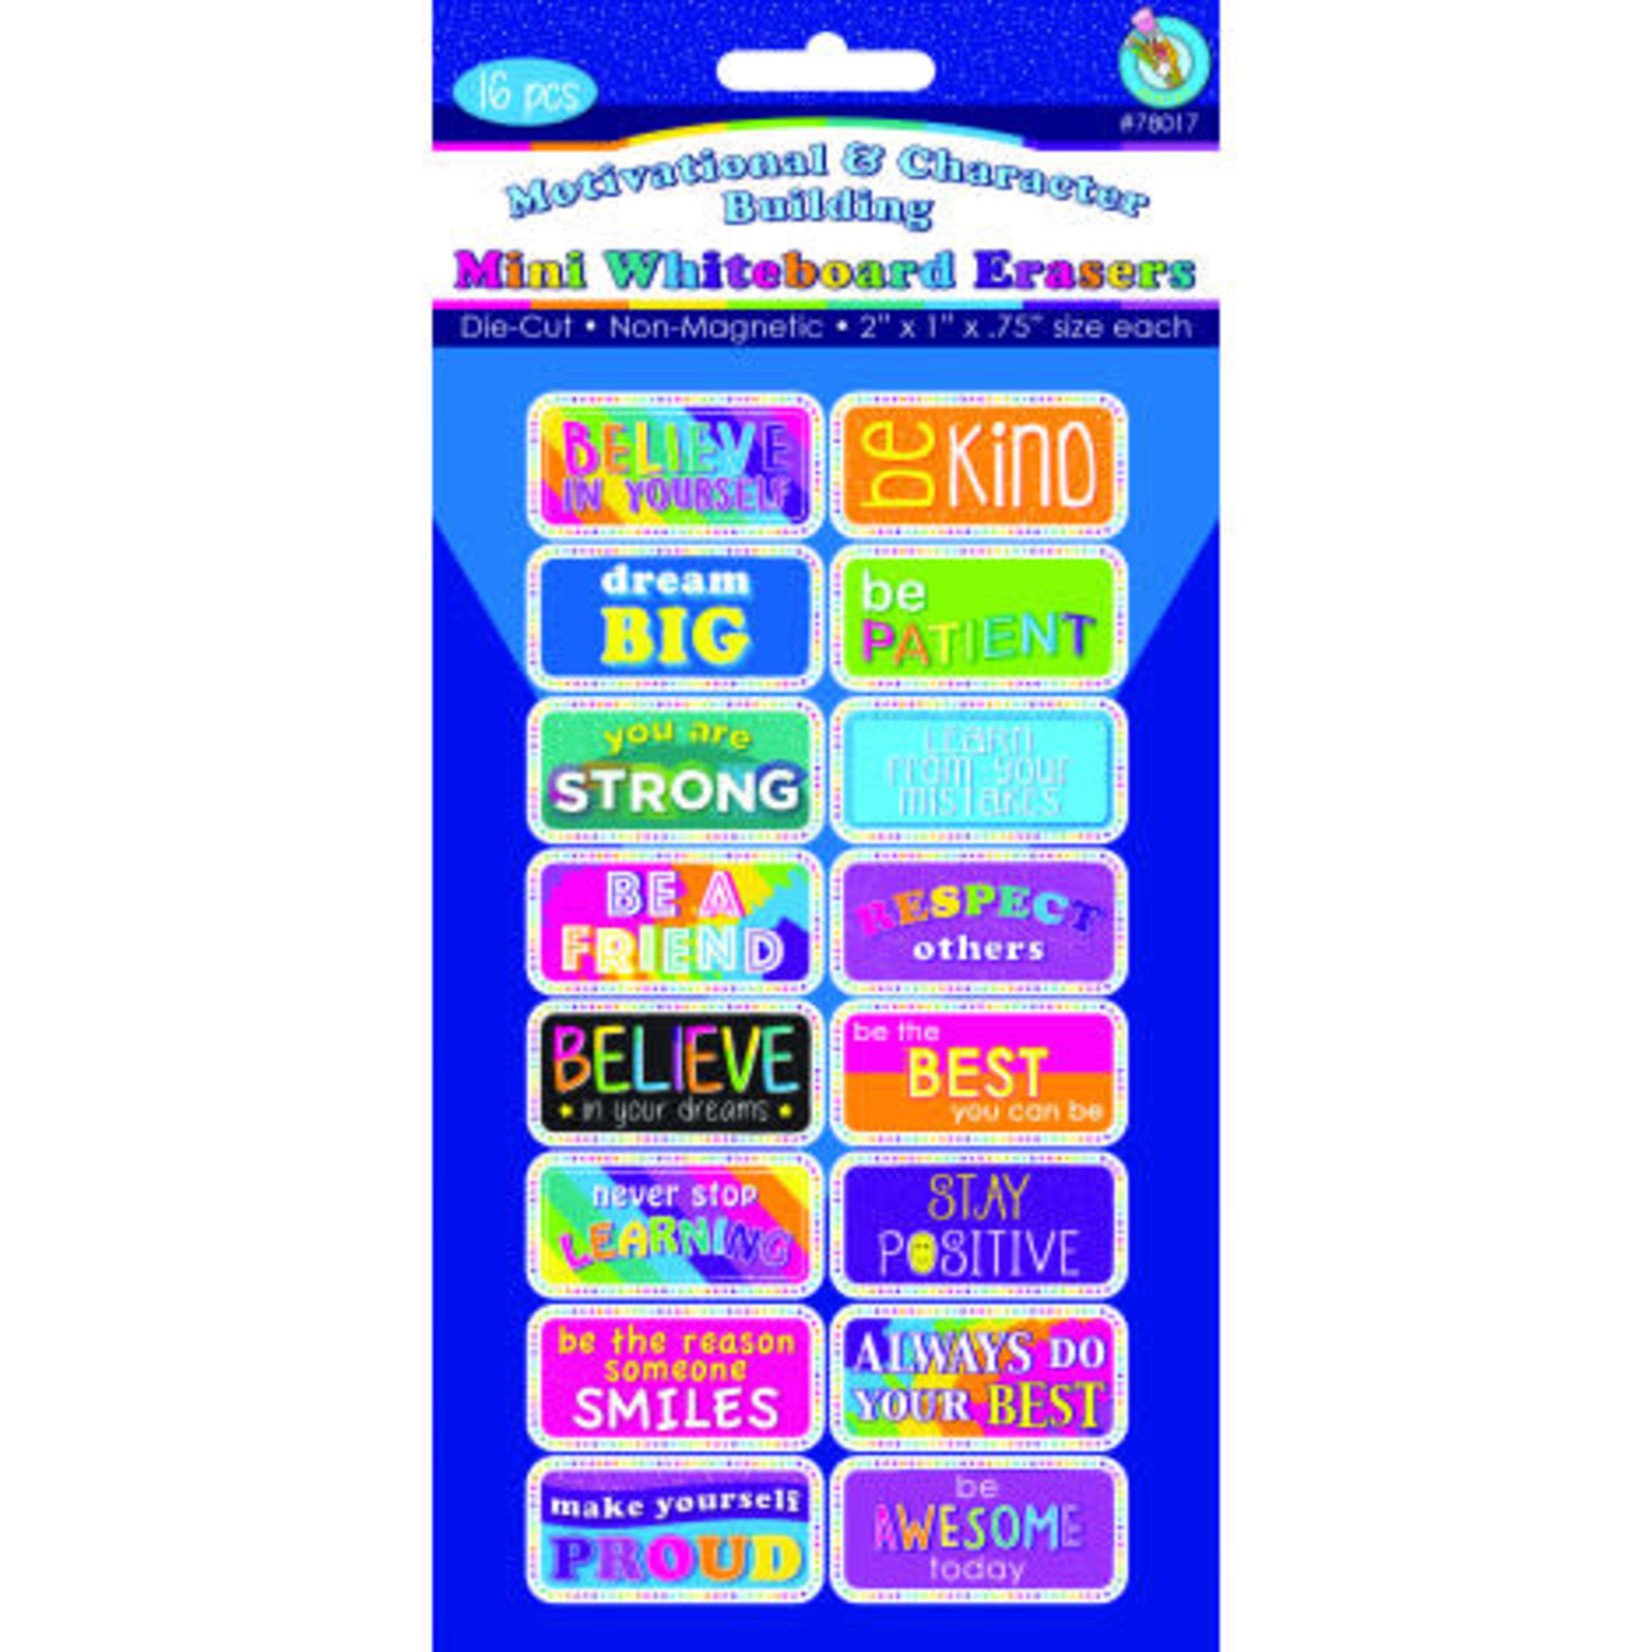 ASHLEY INCORPORATED 16 Pack Non-Magnetic Mini Whiteboard Erasers, Motivational/Character Building